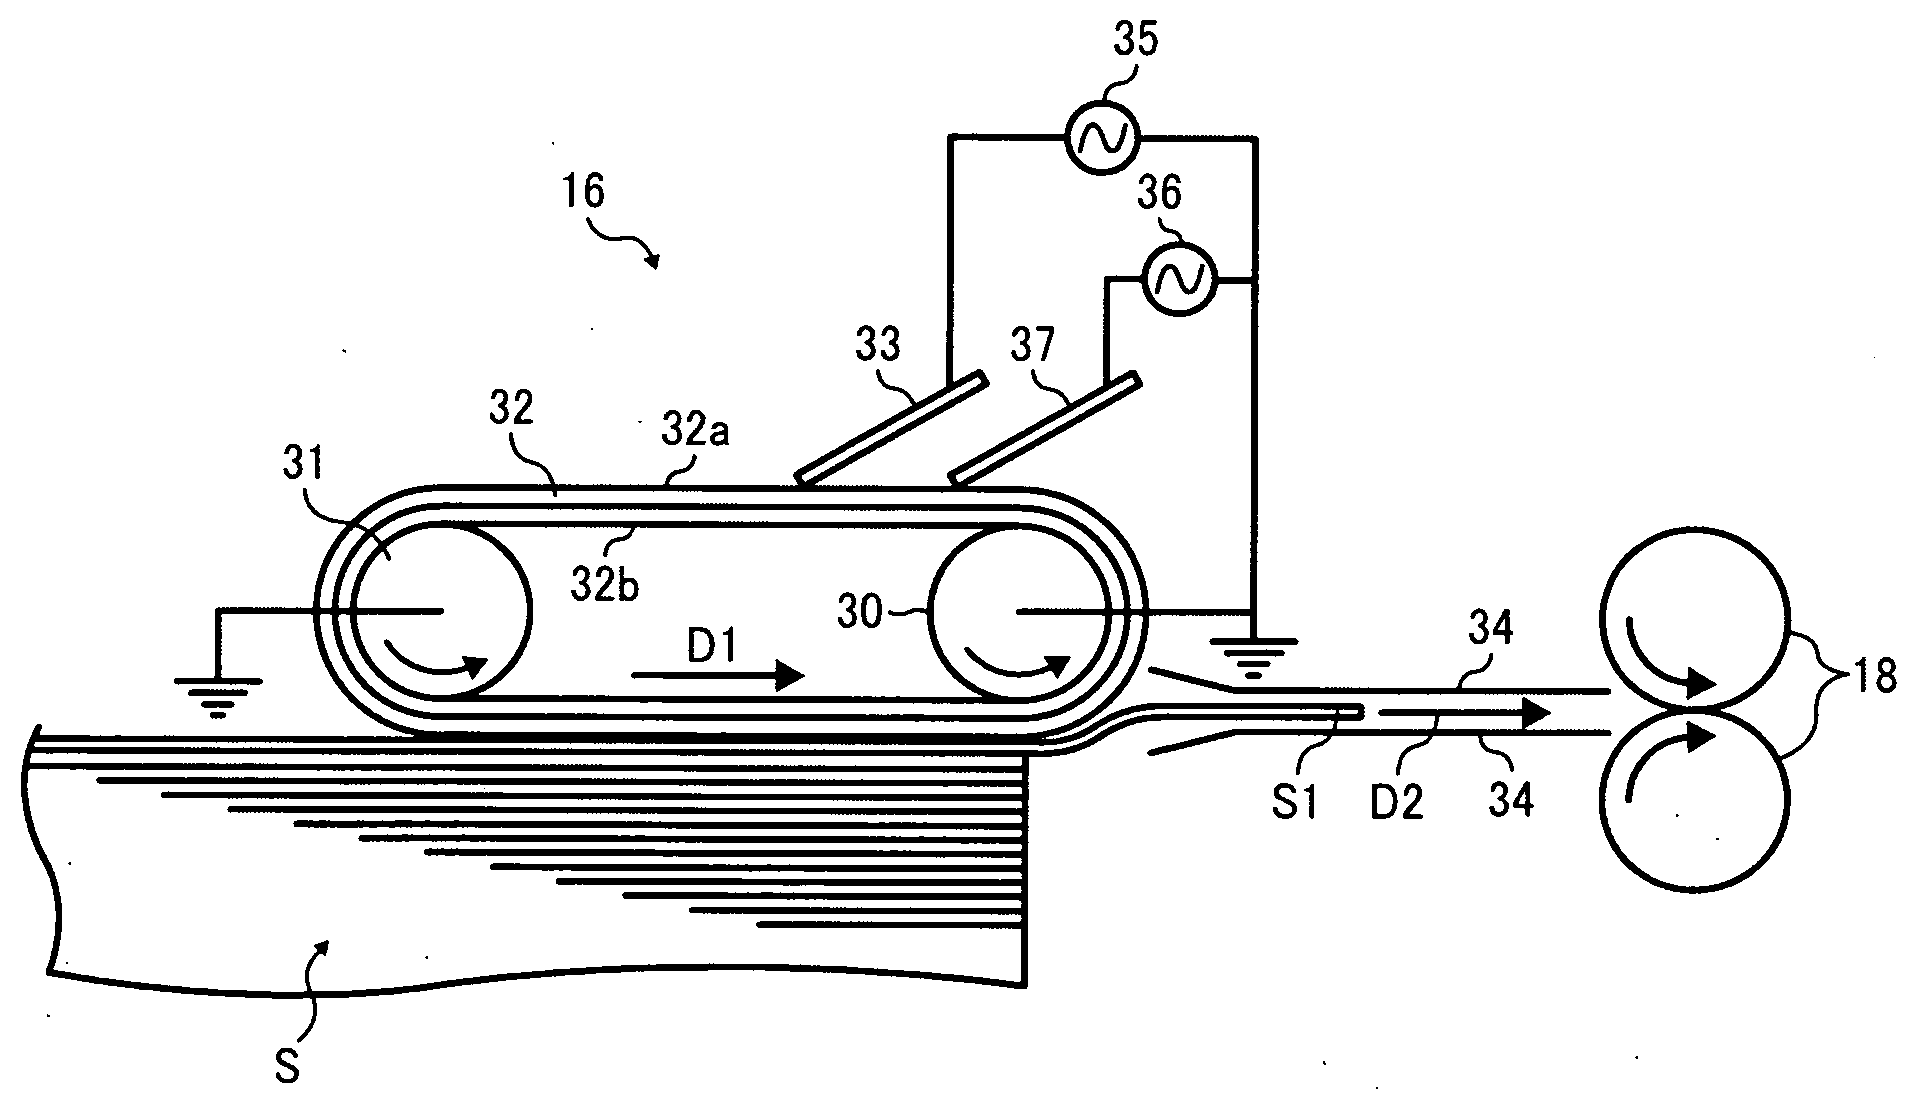 Sheet feeding unit and electrophotographic image forming apparatus